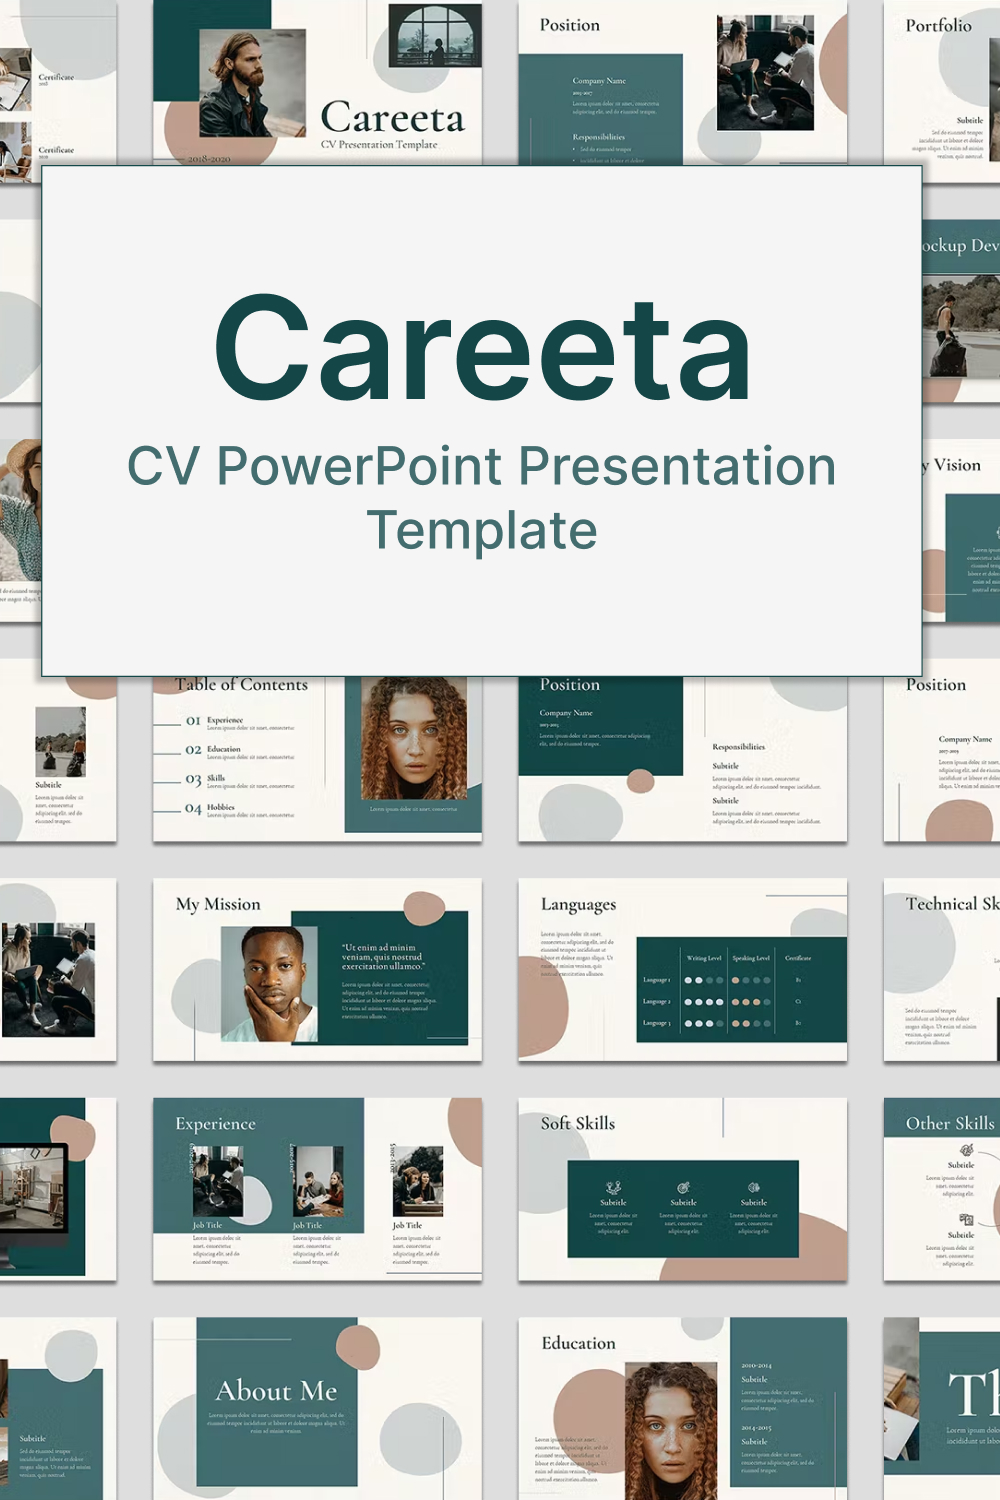 Preview powerpoint presentation template.